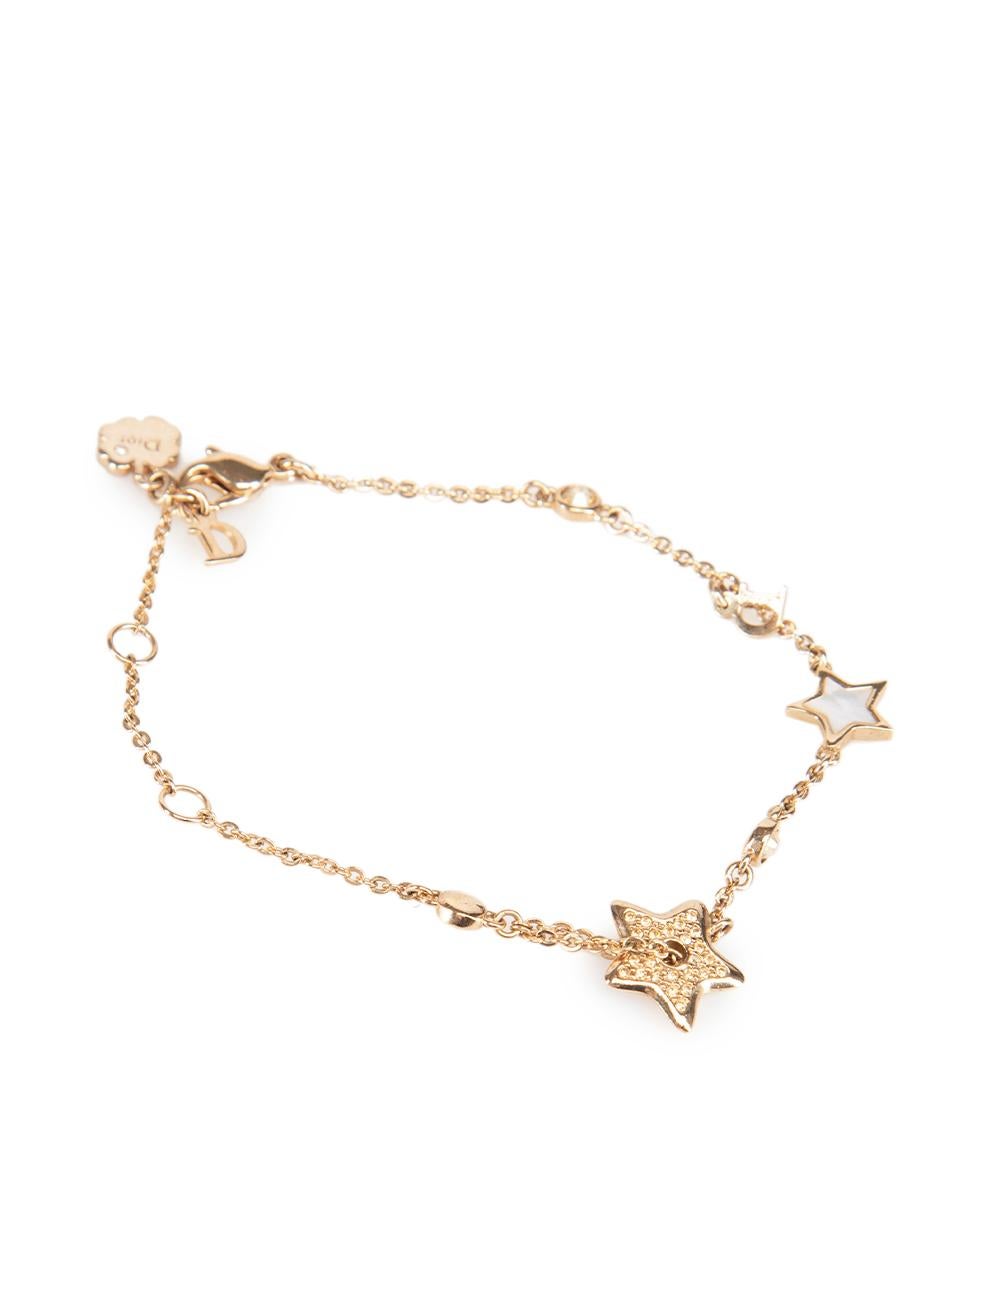 CONDITION is Very good. Minimal wear to bracelet is evident. Minimal wear to the charms with very light scratches on this used Dior designer resale item. This item comes with original box.

Details
Gold
Metal
Charm bracelet
Lobster